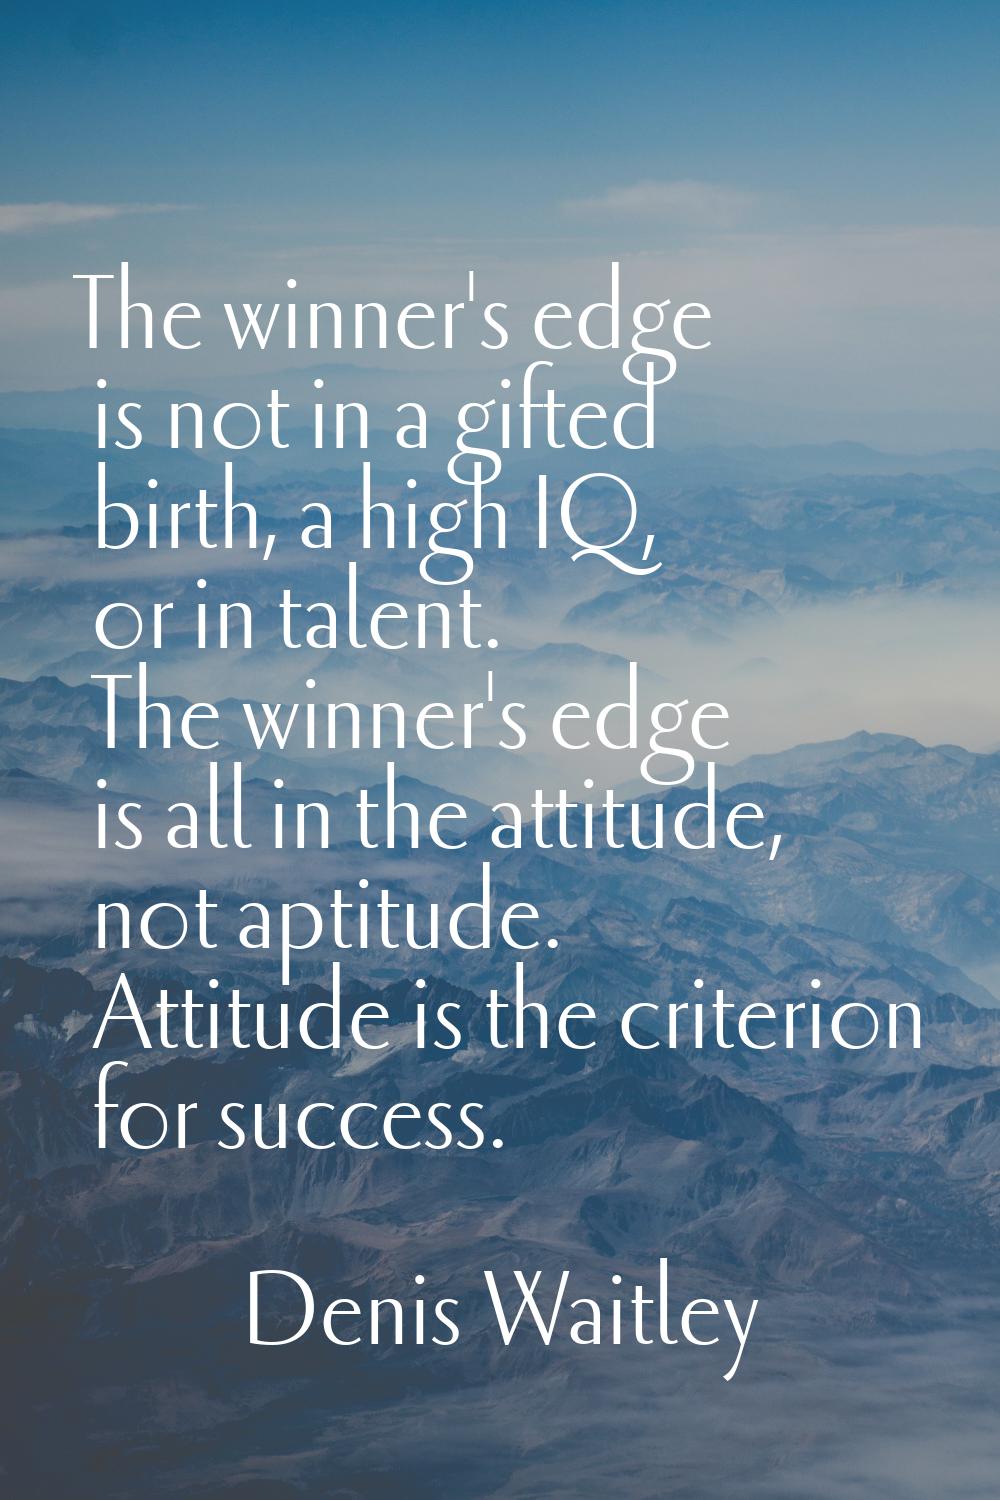 The winner's edge is not in a gifted birth, a high IQ, or in talent. The winner's edge is all in th